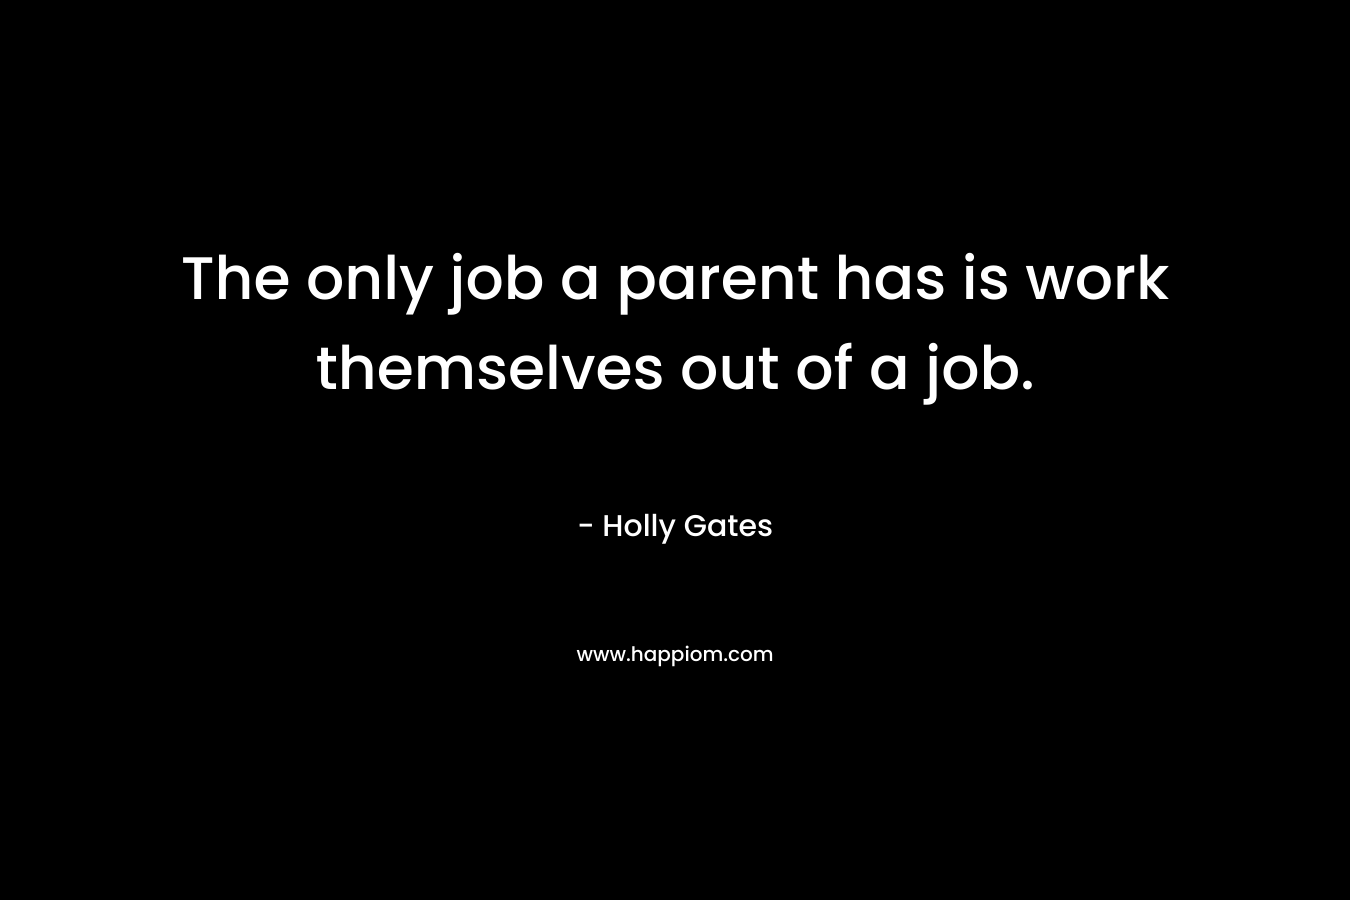 The only job a parent has is work themselves out of a job.